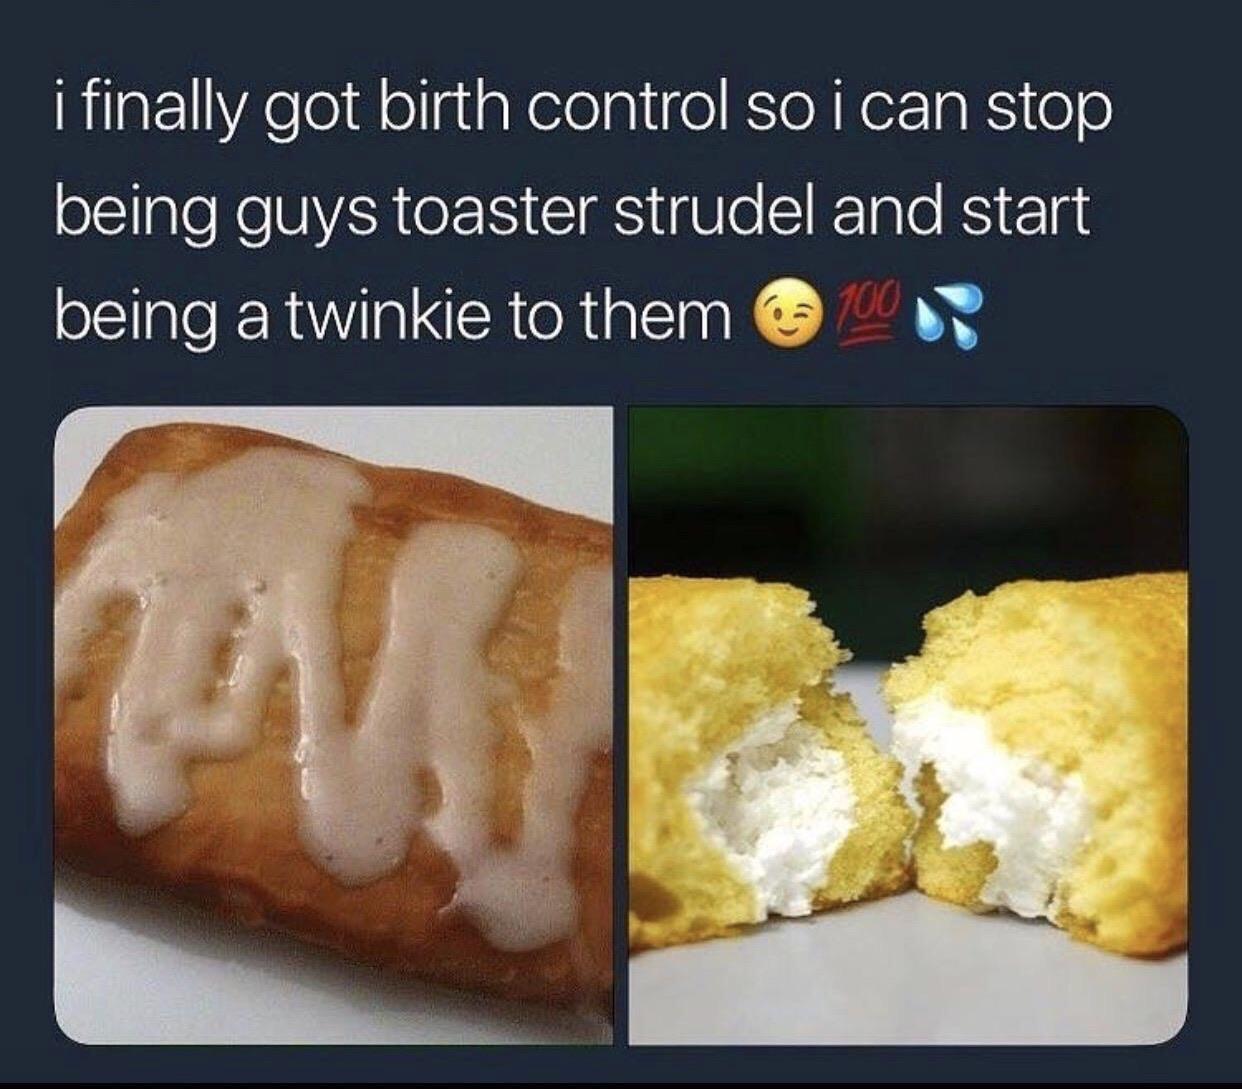 toaster strudel twinkie meme - i finally got birth control so i can stop being guys toaster strudel and start being a twinkie to them